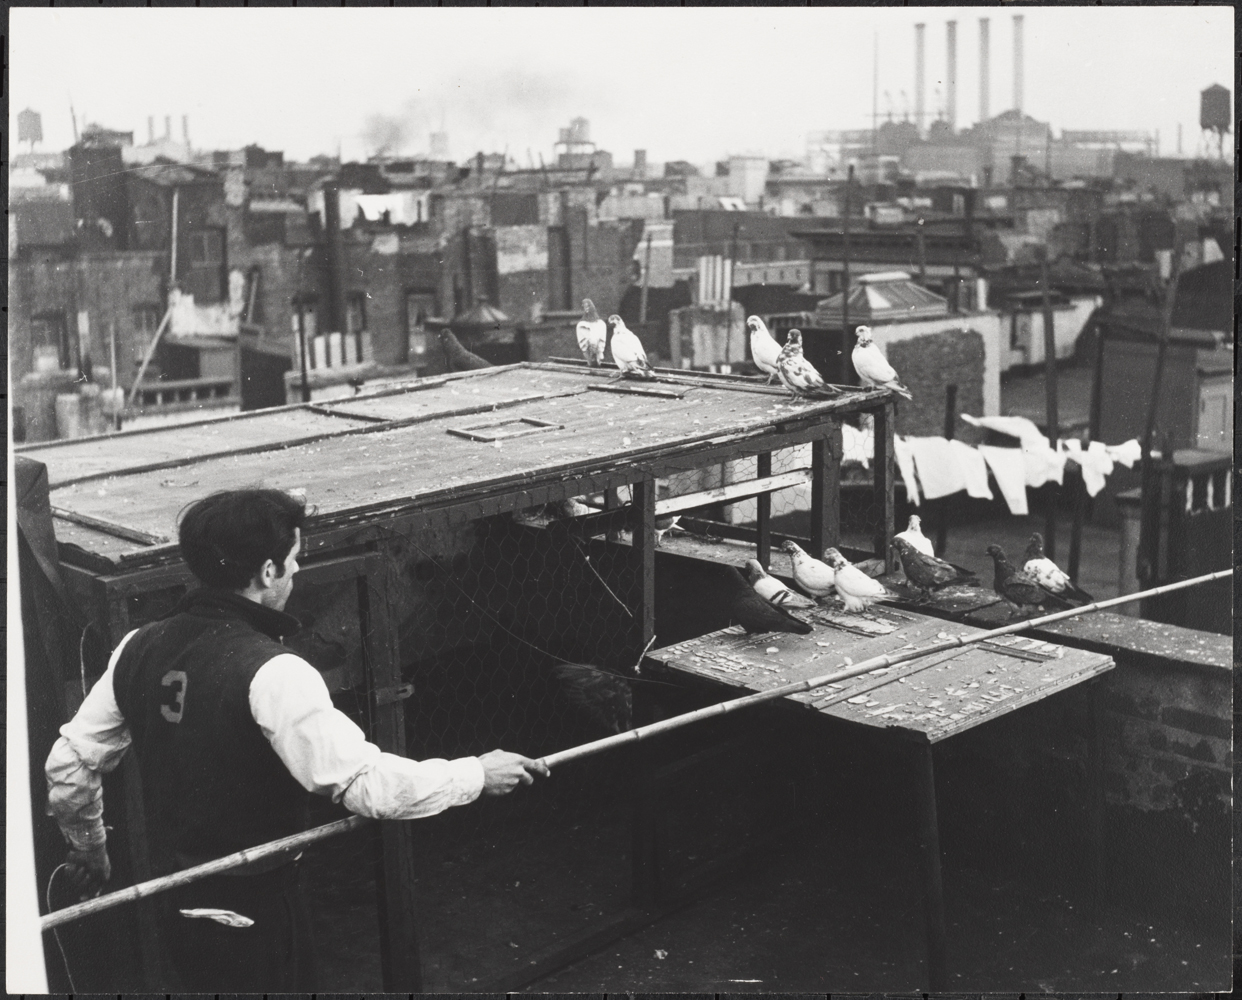 Roy Perry. Raising Pigeons on Rooftops, Lower East Side, ca 1940. Museum of the City of New York 80.102.144